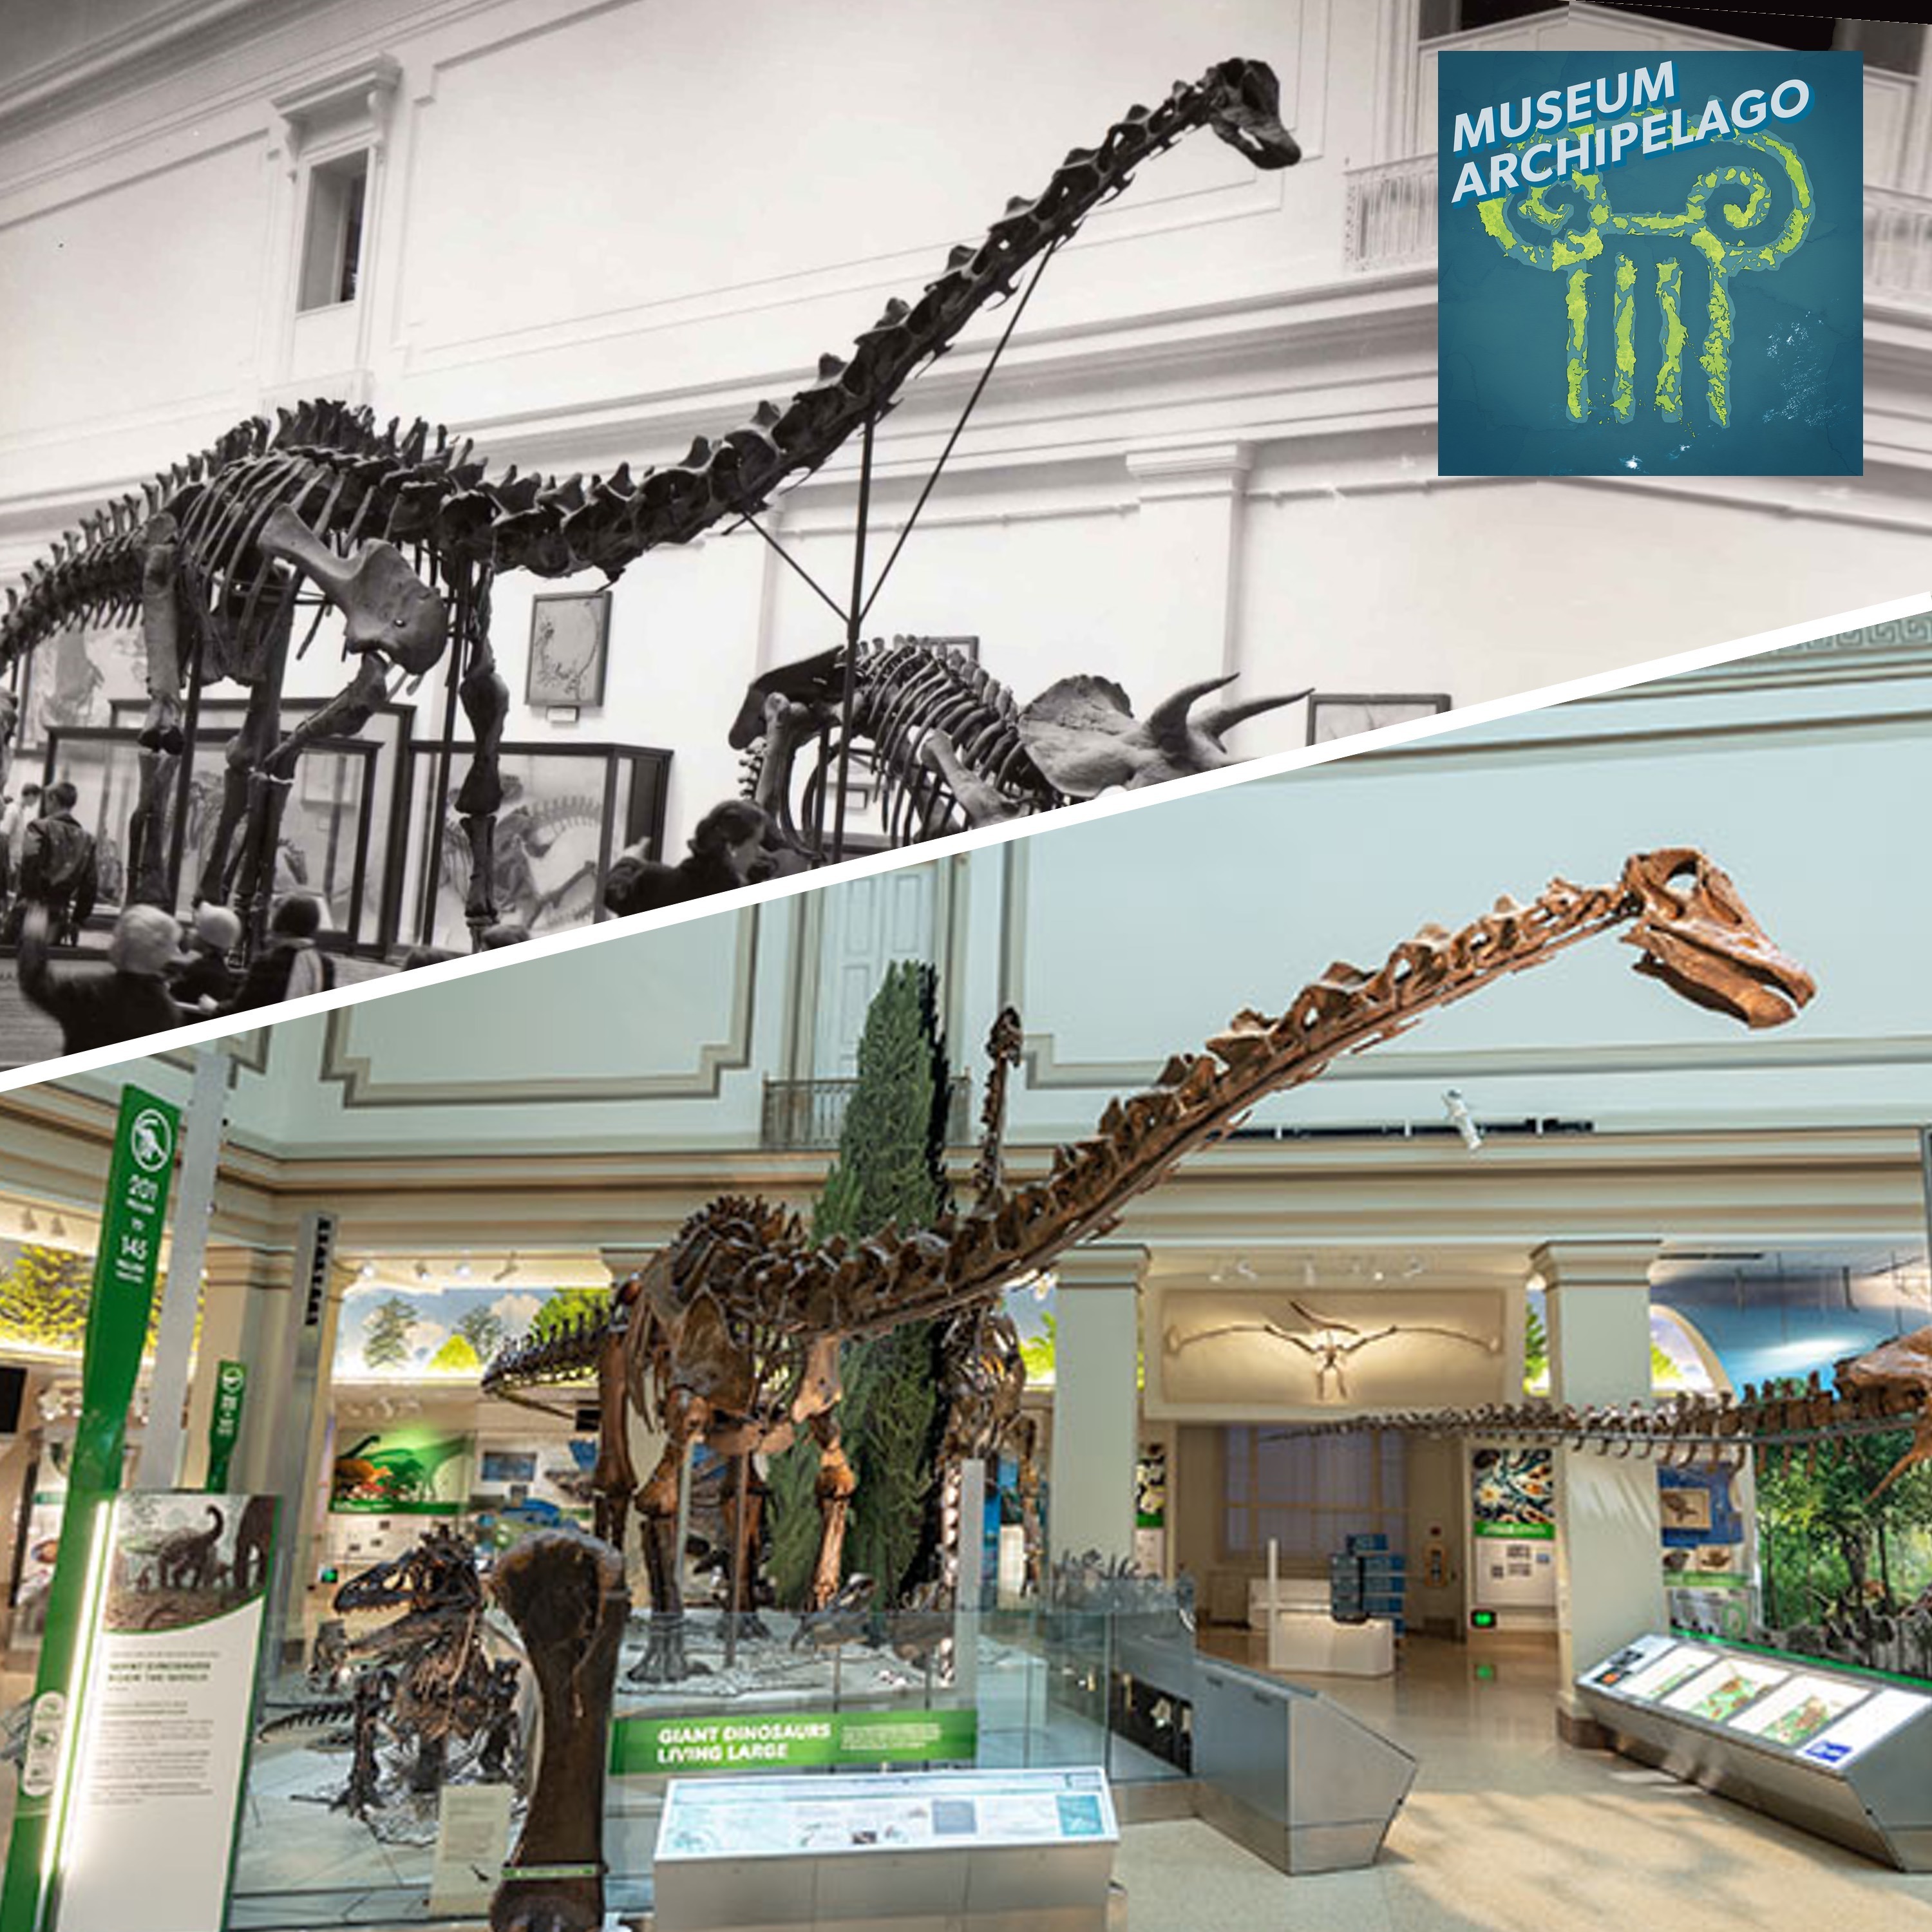 66. From ‘Extinct Monsters’ to ‘Deep Time’: A History of the Smithsonian Fossil Hall